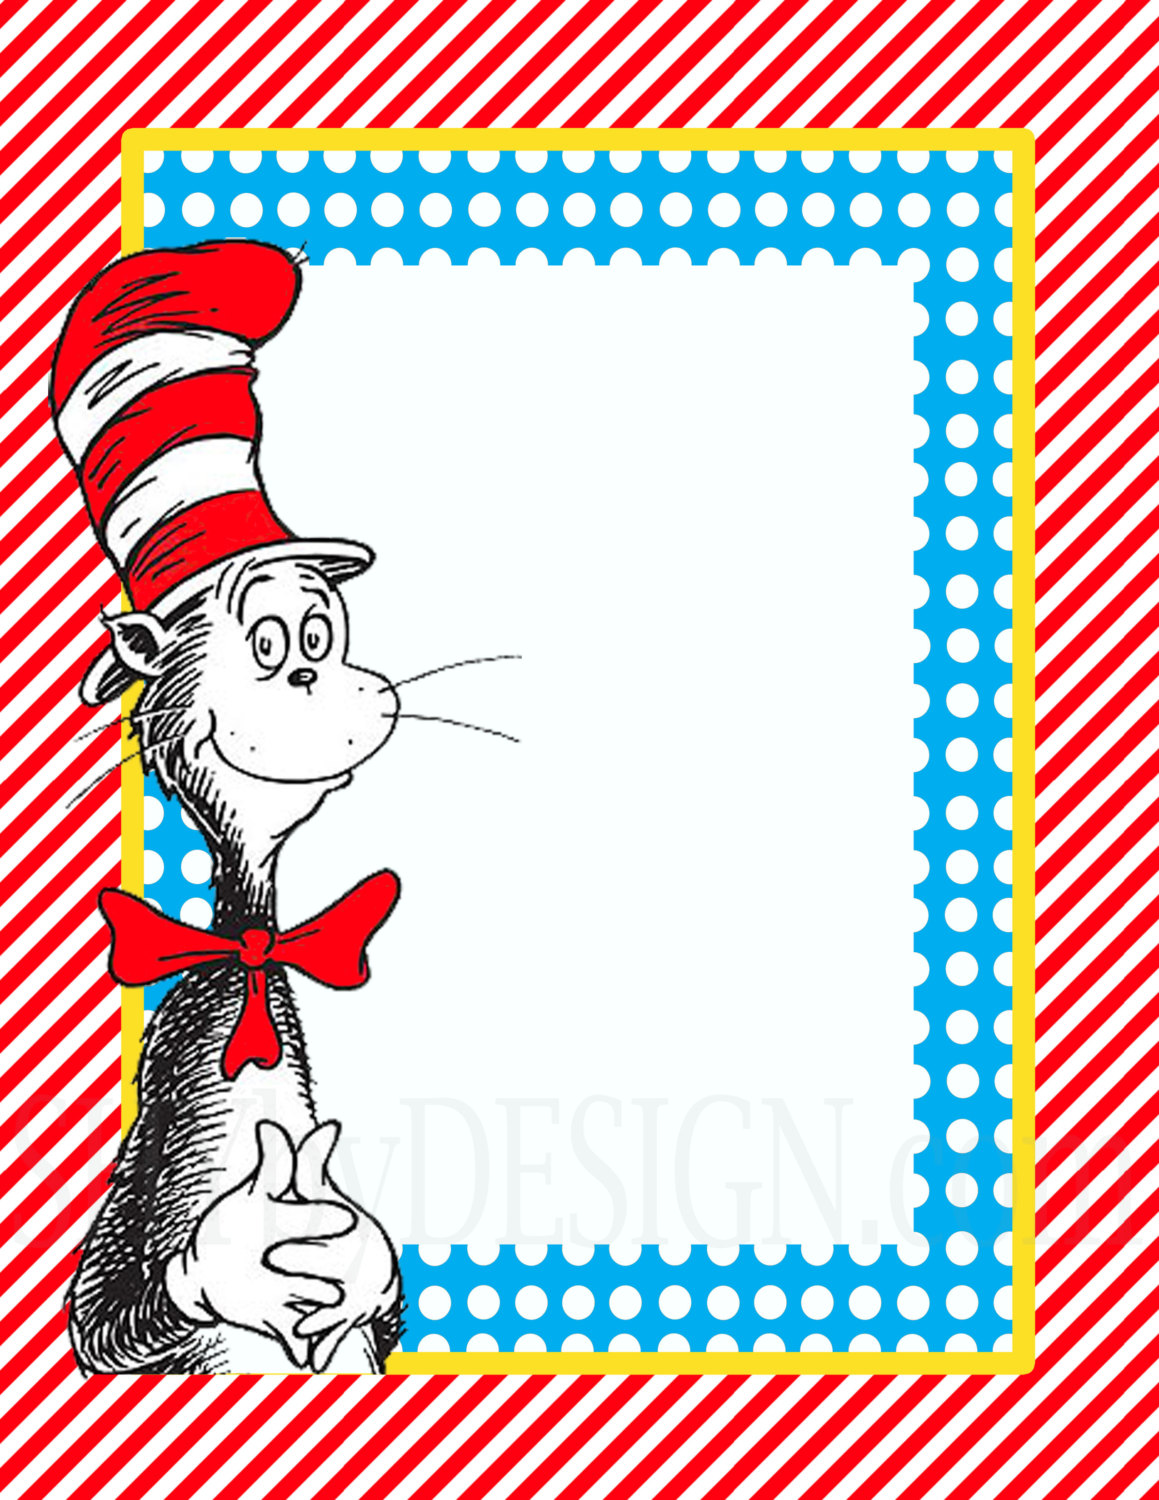 Dr Seuss Powerpoint Background.